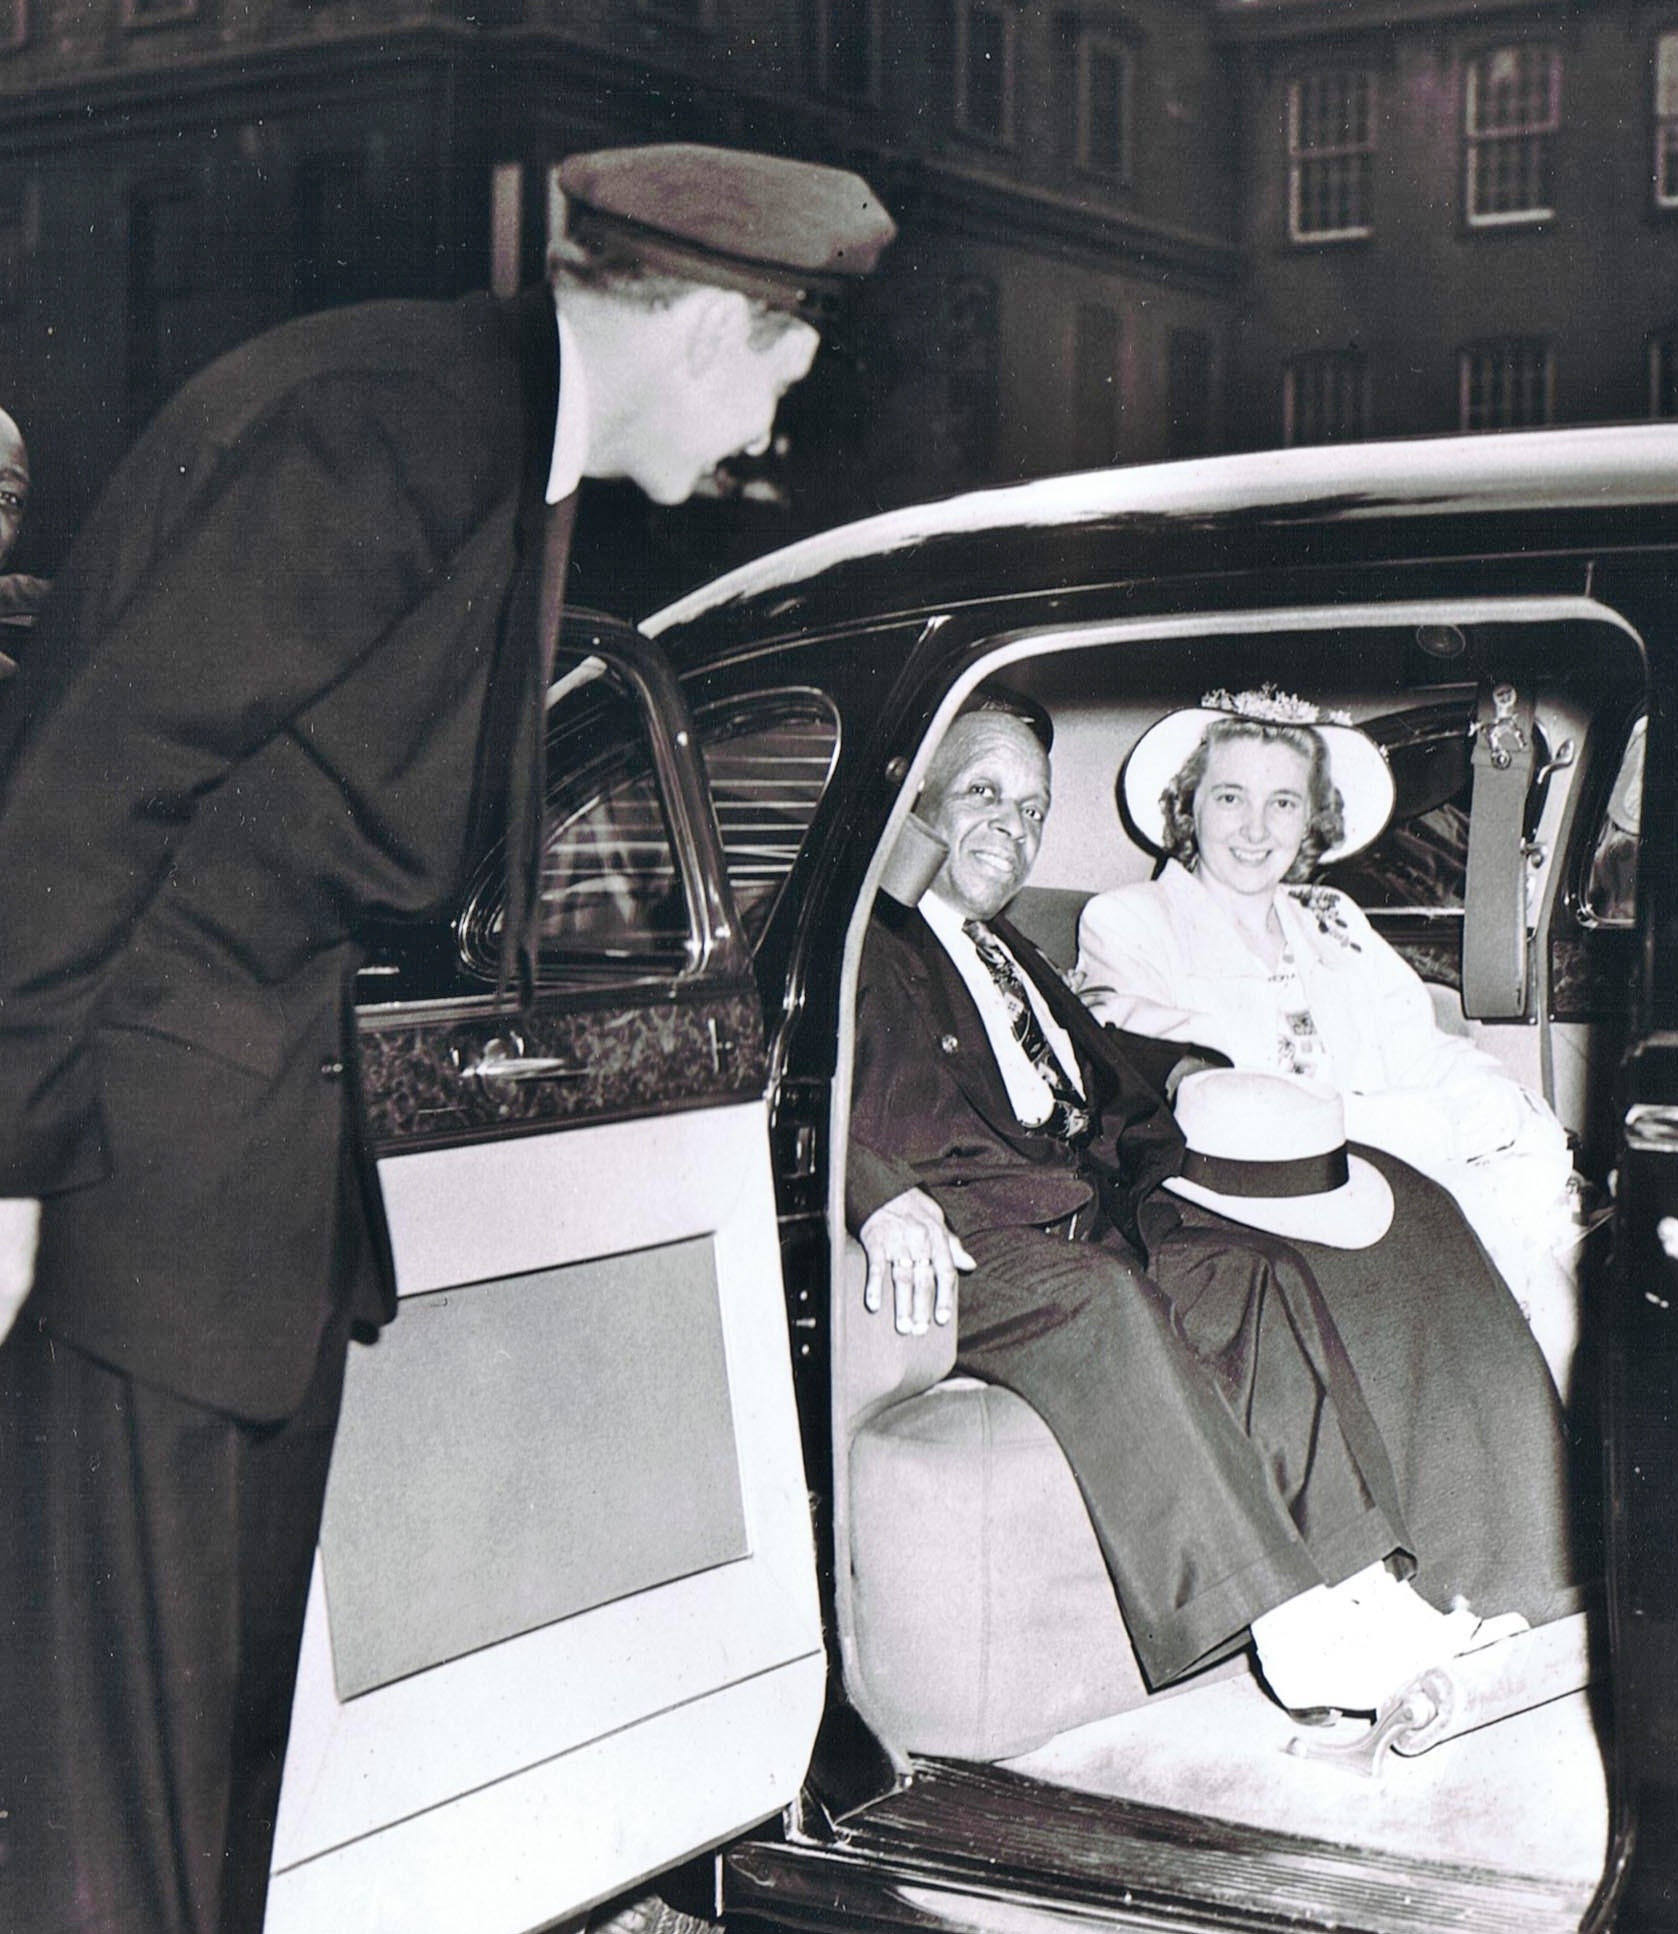 FATHER DIVINE and MOTHER DIVINE in the limo.